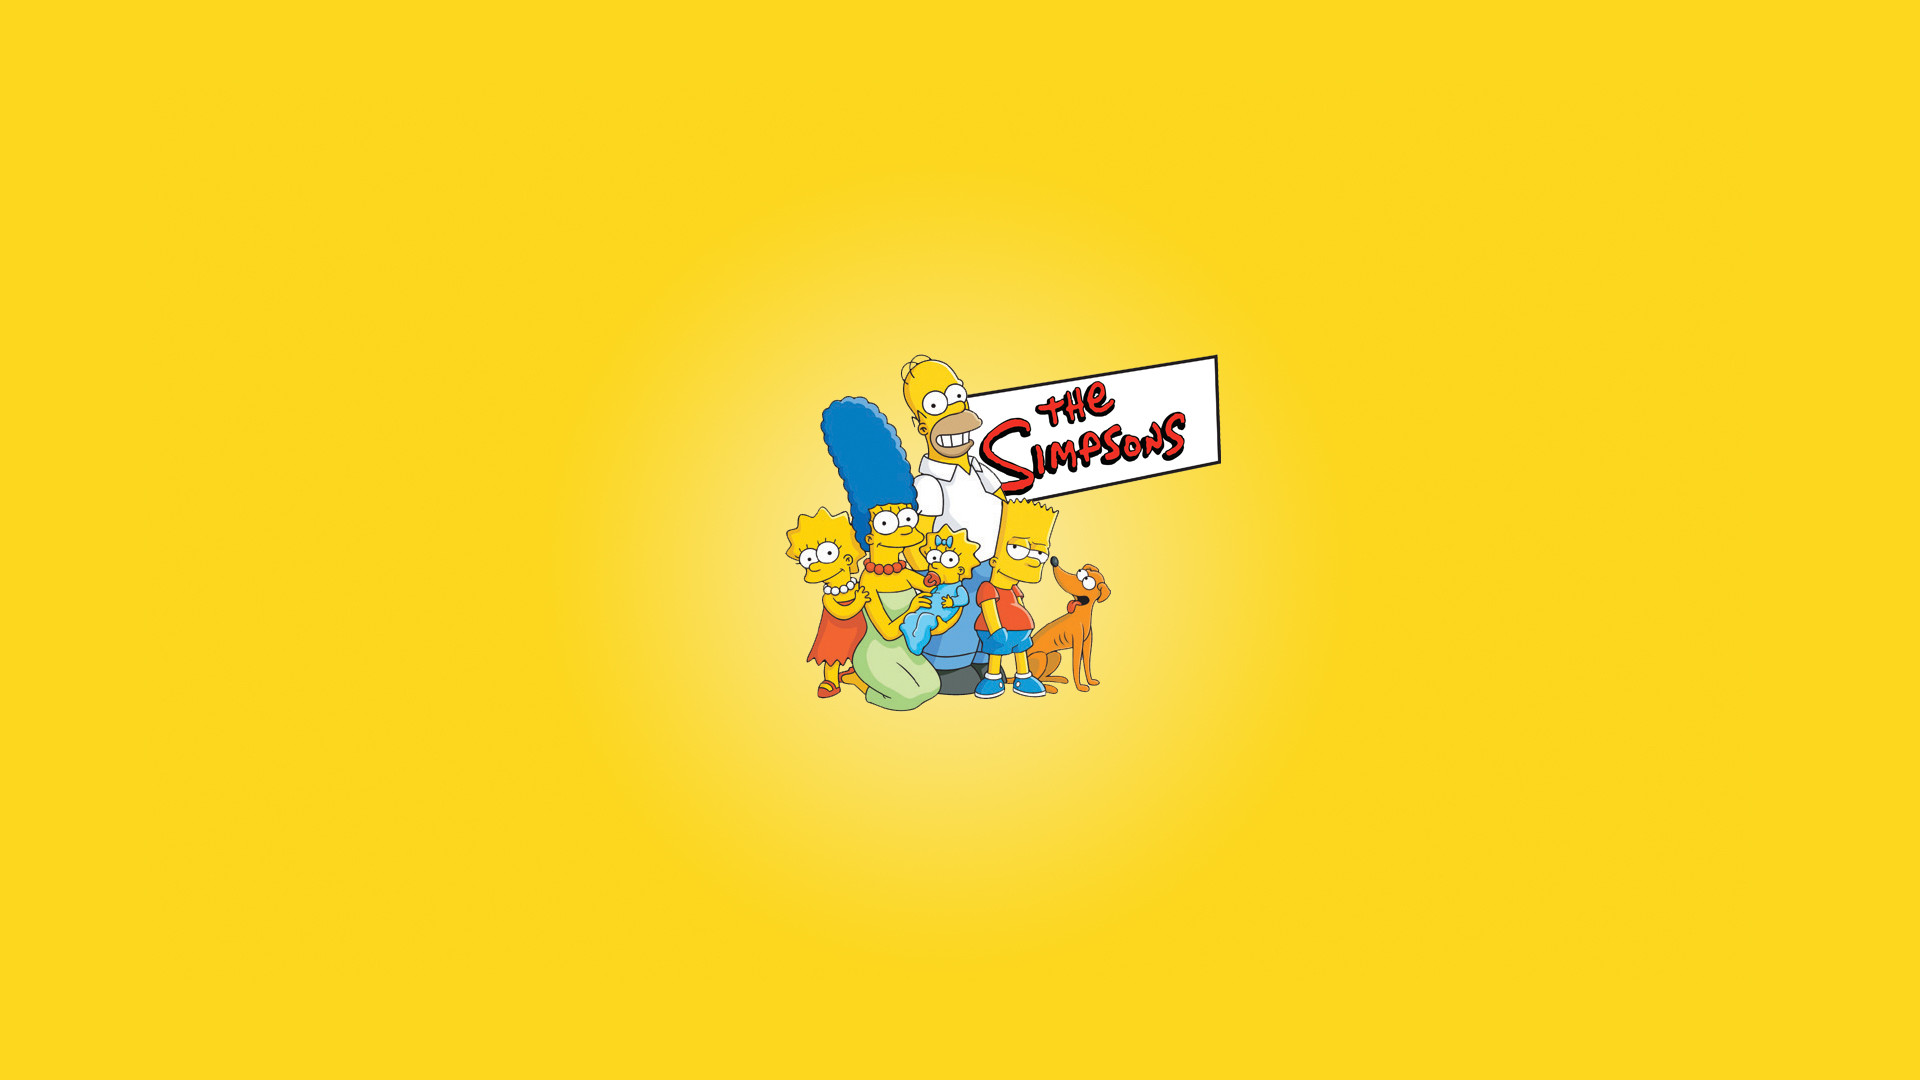 1920x1080 The Simpsons wallpaper 29